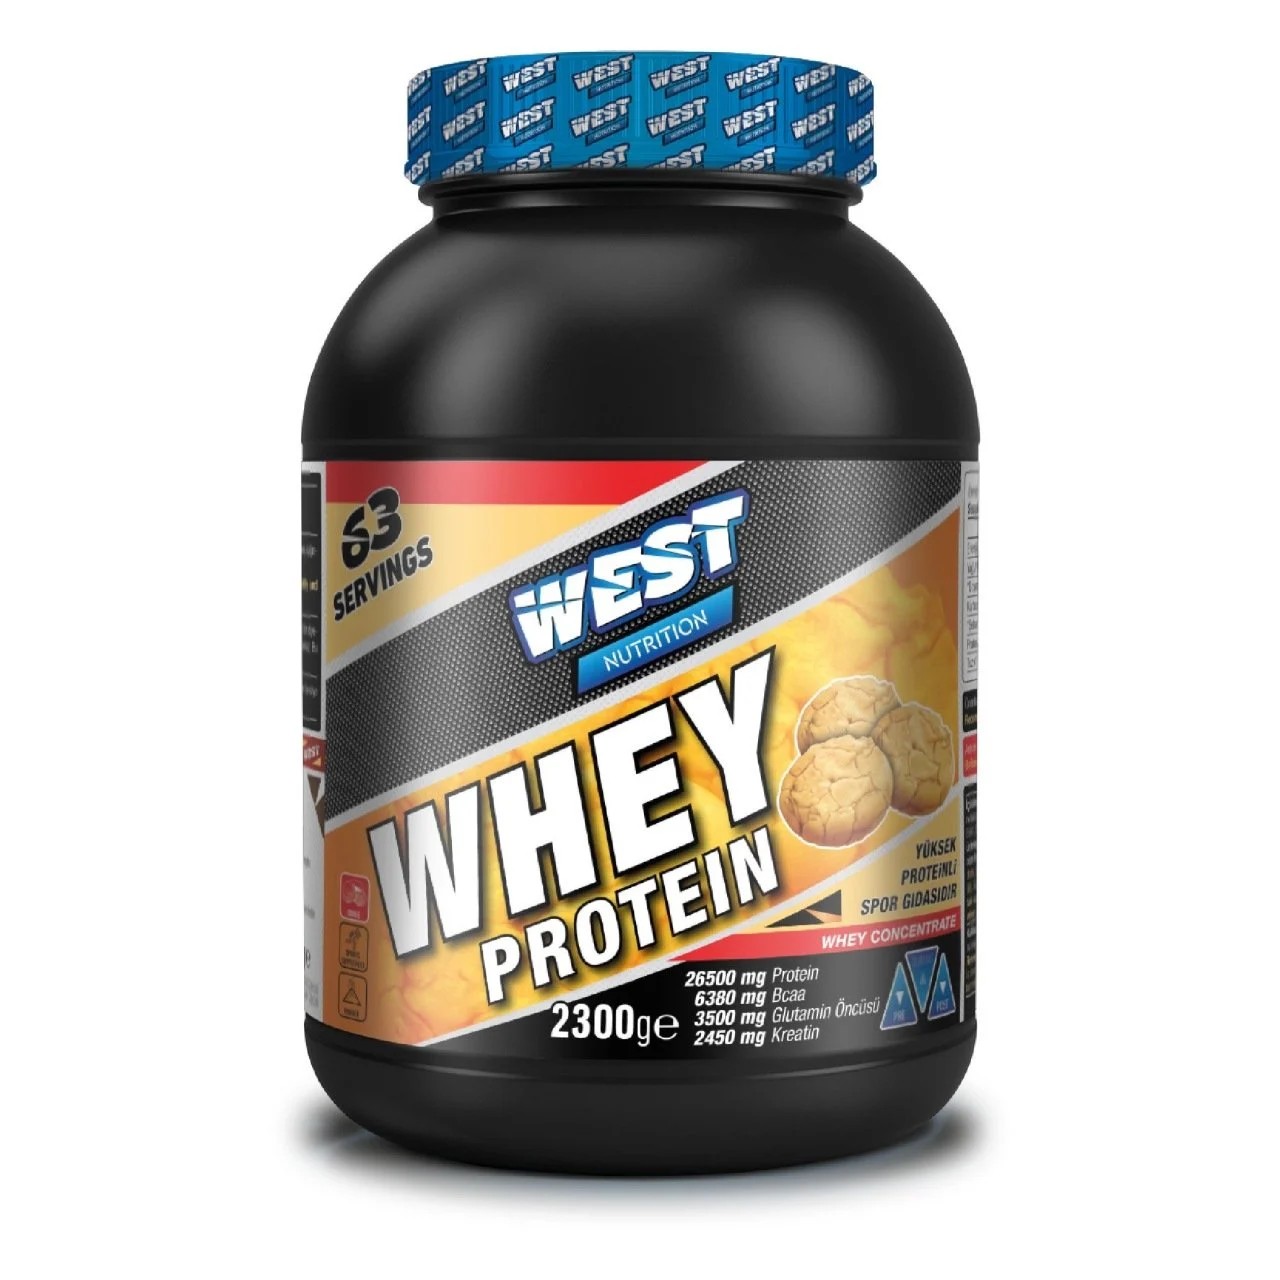 West Nutrition Whey Protein